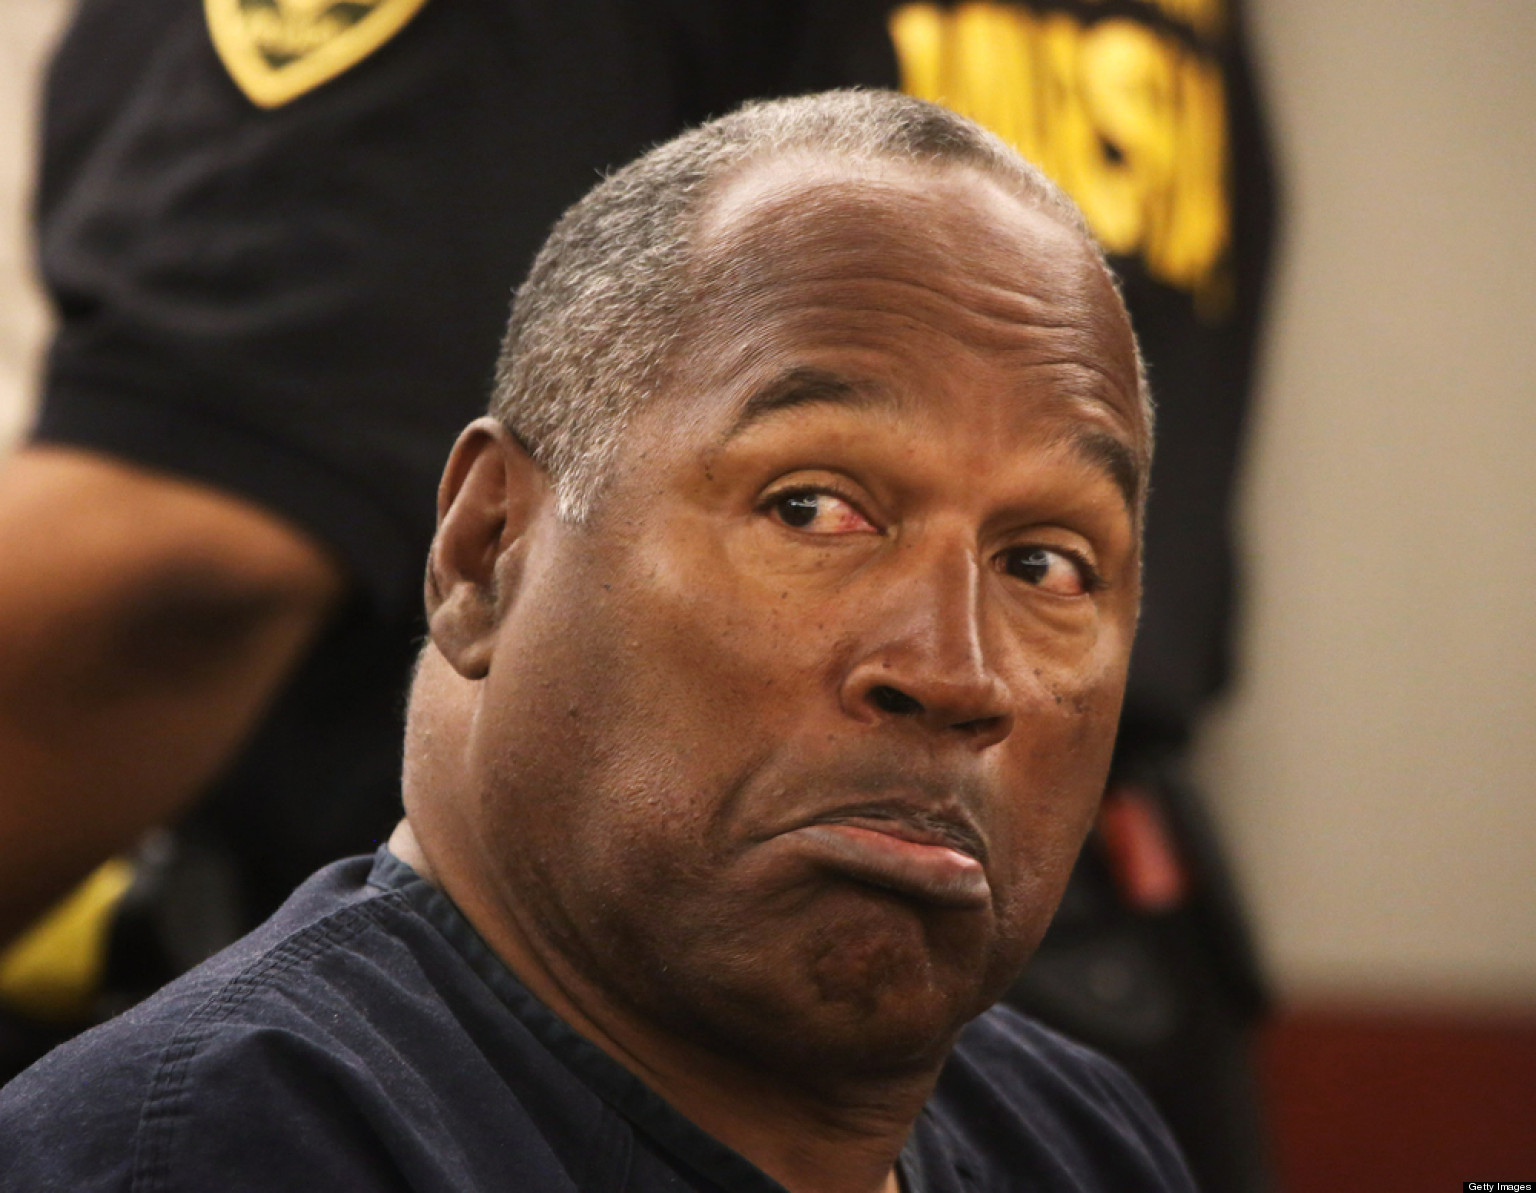 n one of the most televised criminal court proceedings, OJ Simpson, whose career includes playing for the Buffalo Bills and the San Francisco 49ers, was accused of kidnapping and the murder of his wife Nicole Brown Simpson and Ronald Goldman. On October 3, 1998, a jury found him not guilty of the two murders.